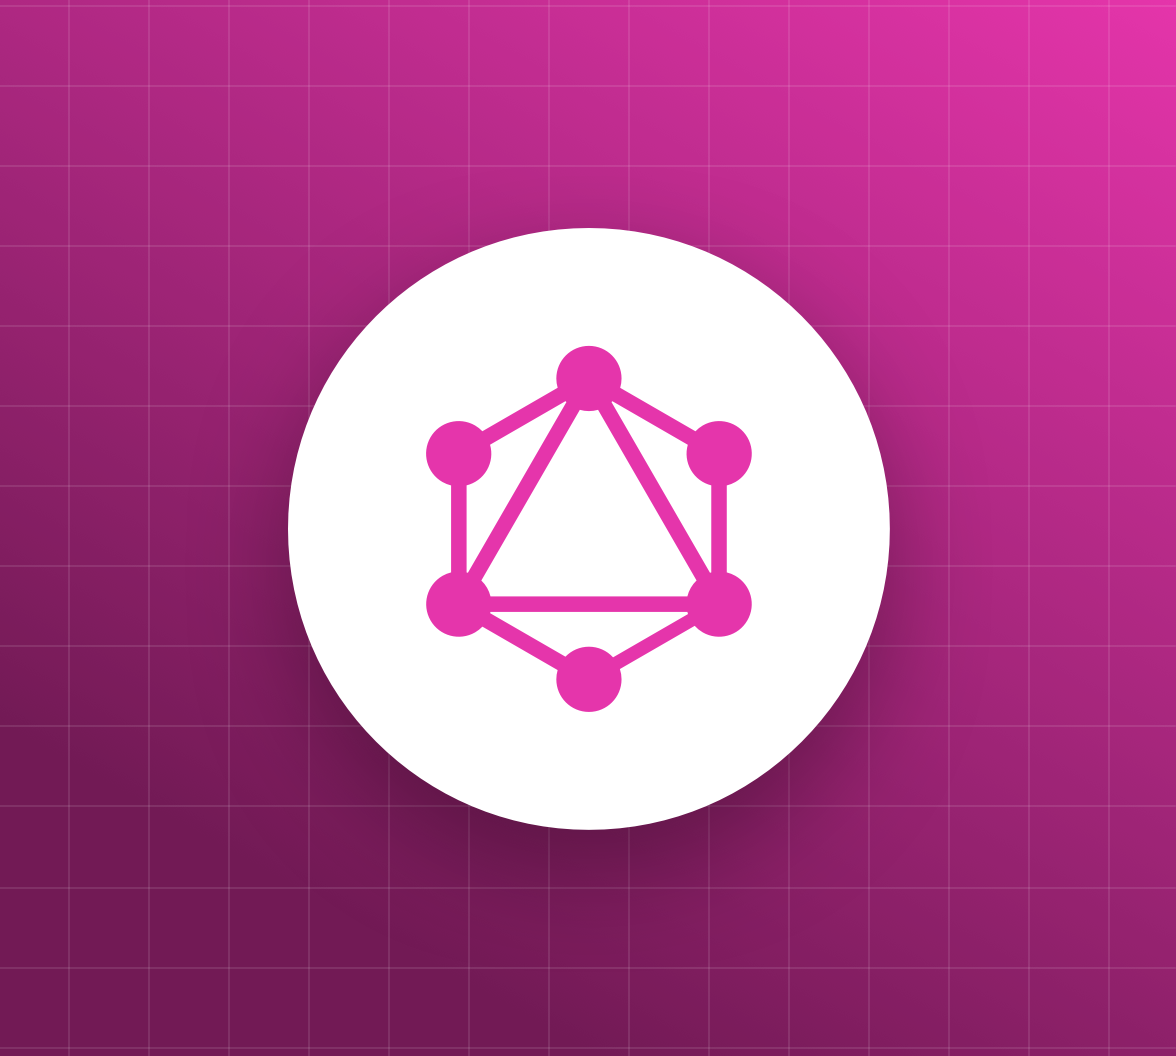 How to Develop and Secure GraphQL APIs with Laravel PHP